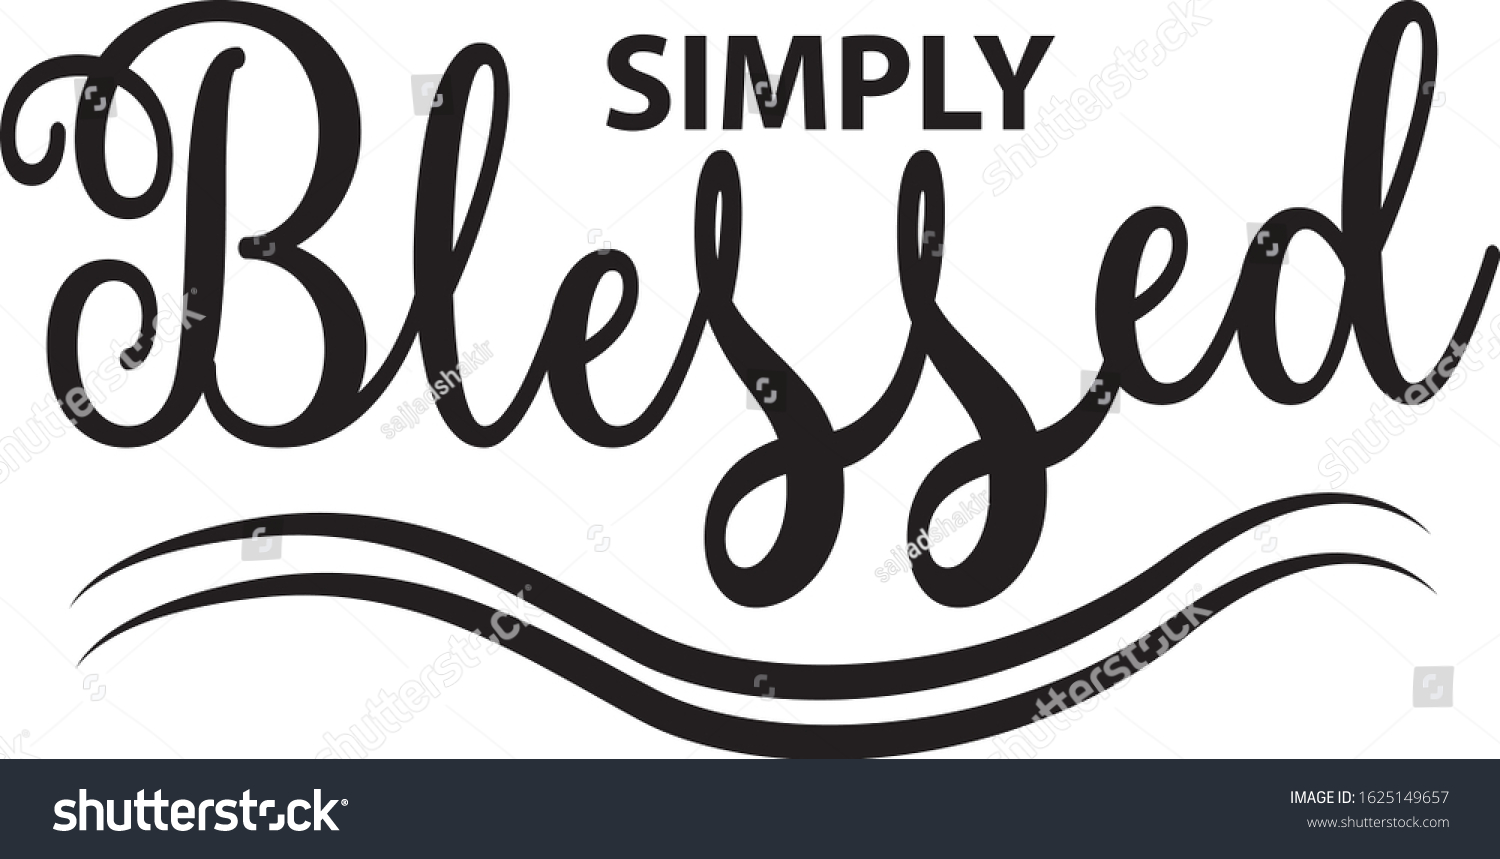 Download Simply Blessed Eps Vector File Tshirt Stock Vector Royalty Free 1625149657 SVG, PNG, EPS, DXF File